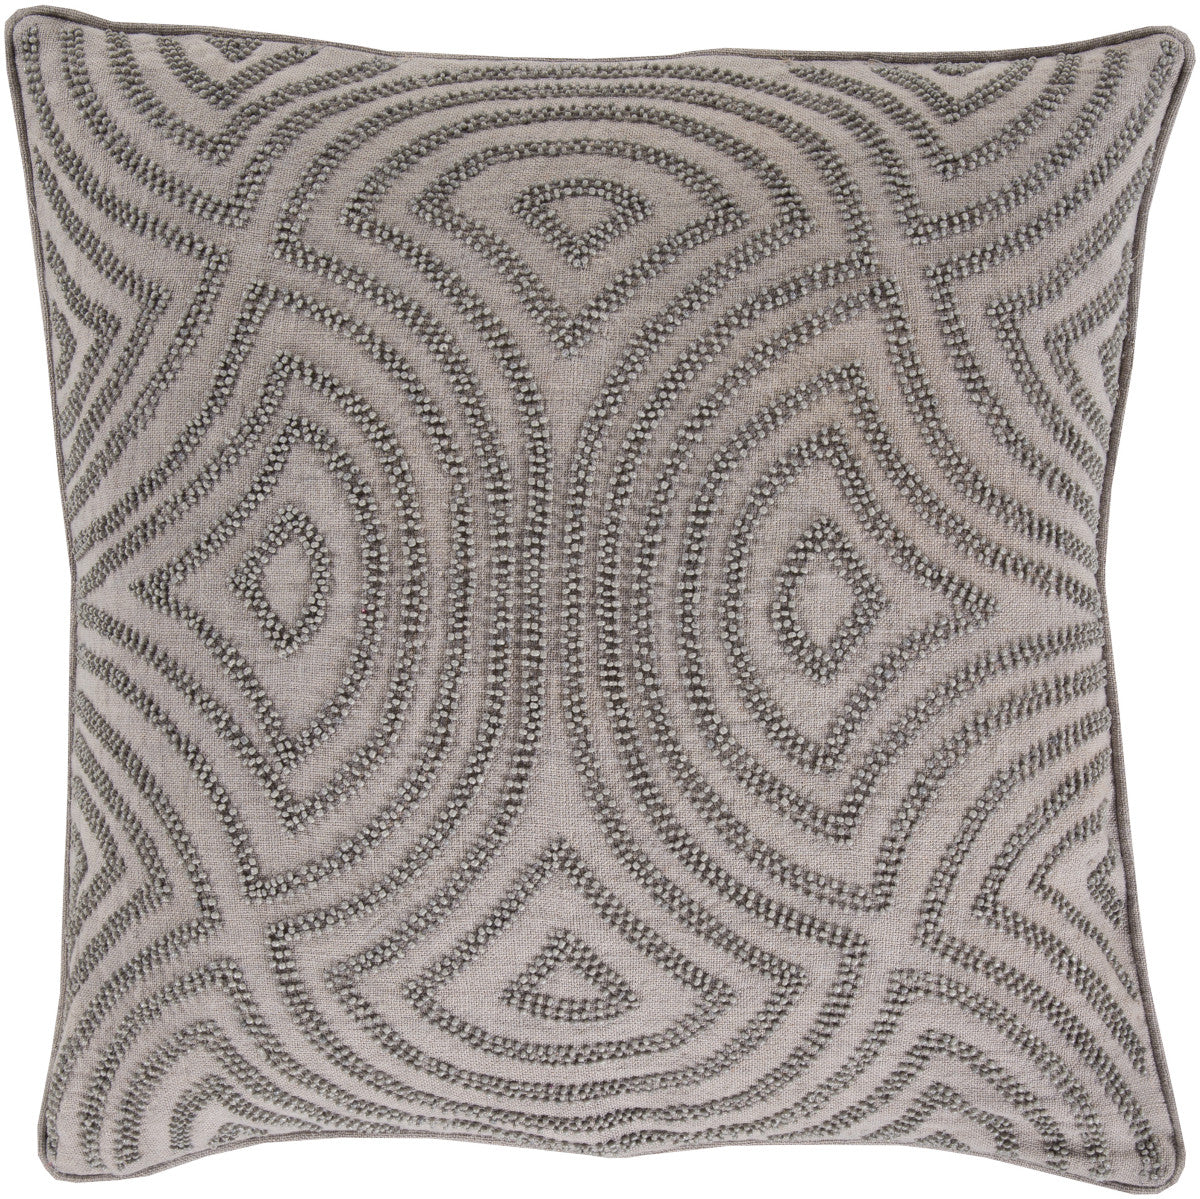 Surya Skinny Dip Linen and Beads SKD-003 Pillow by Candice Olson